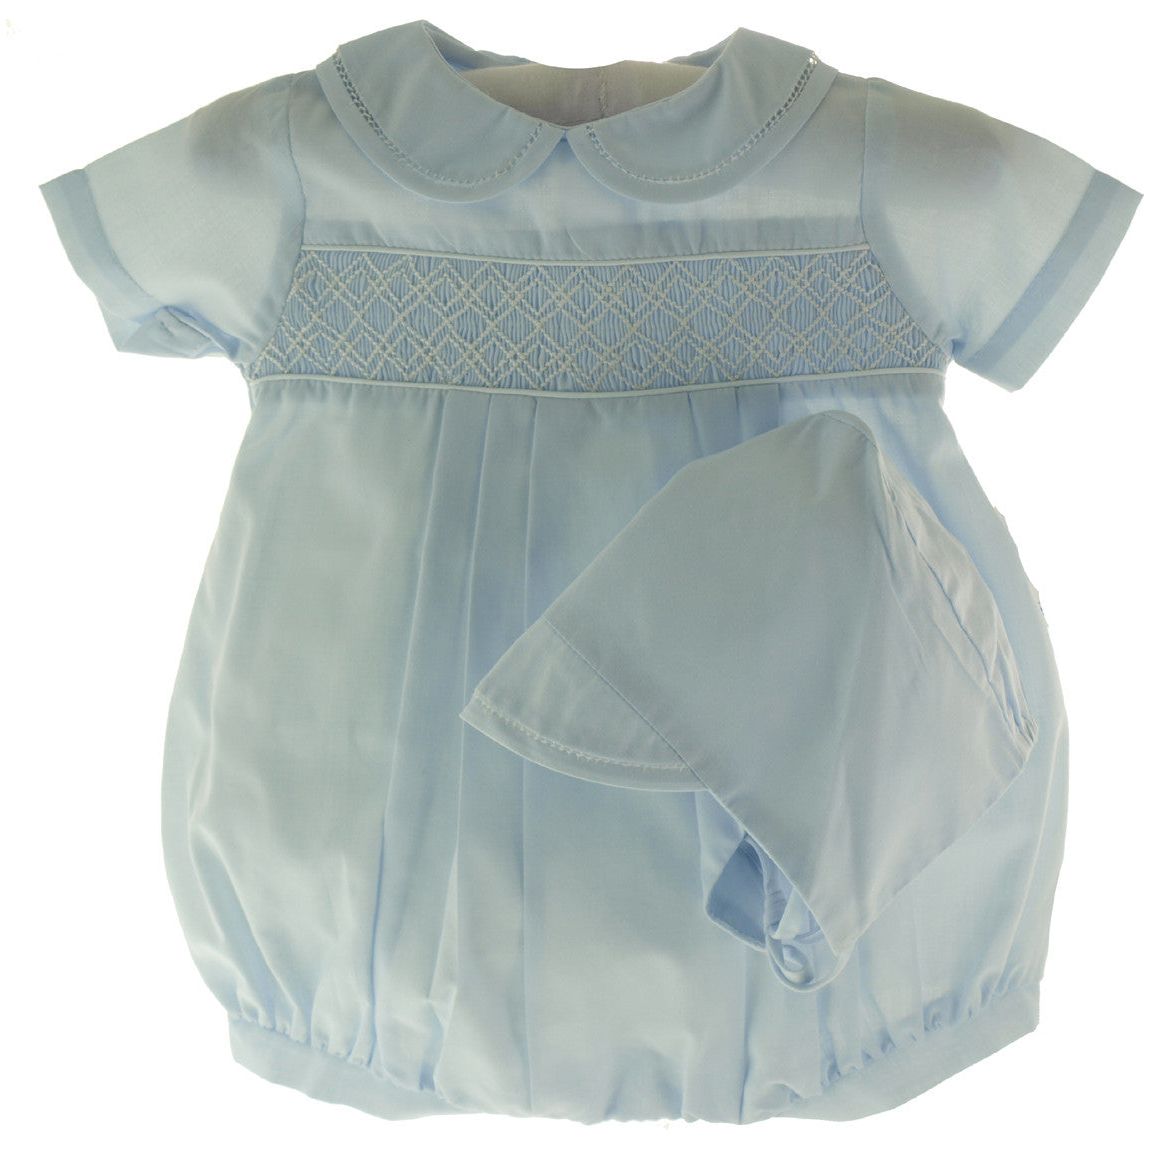 Newborn Boys Blue Smocked Bubble Outfit